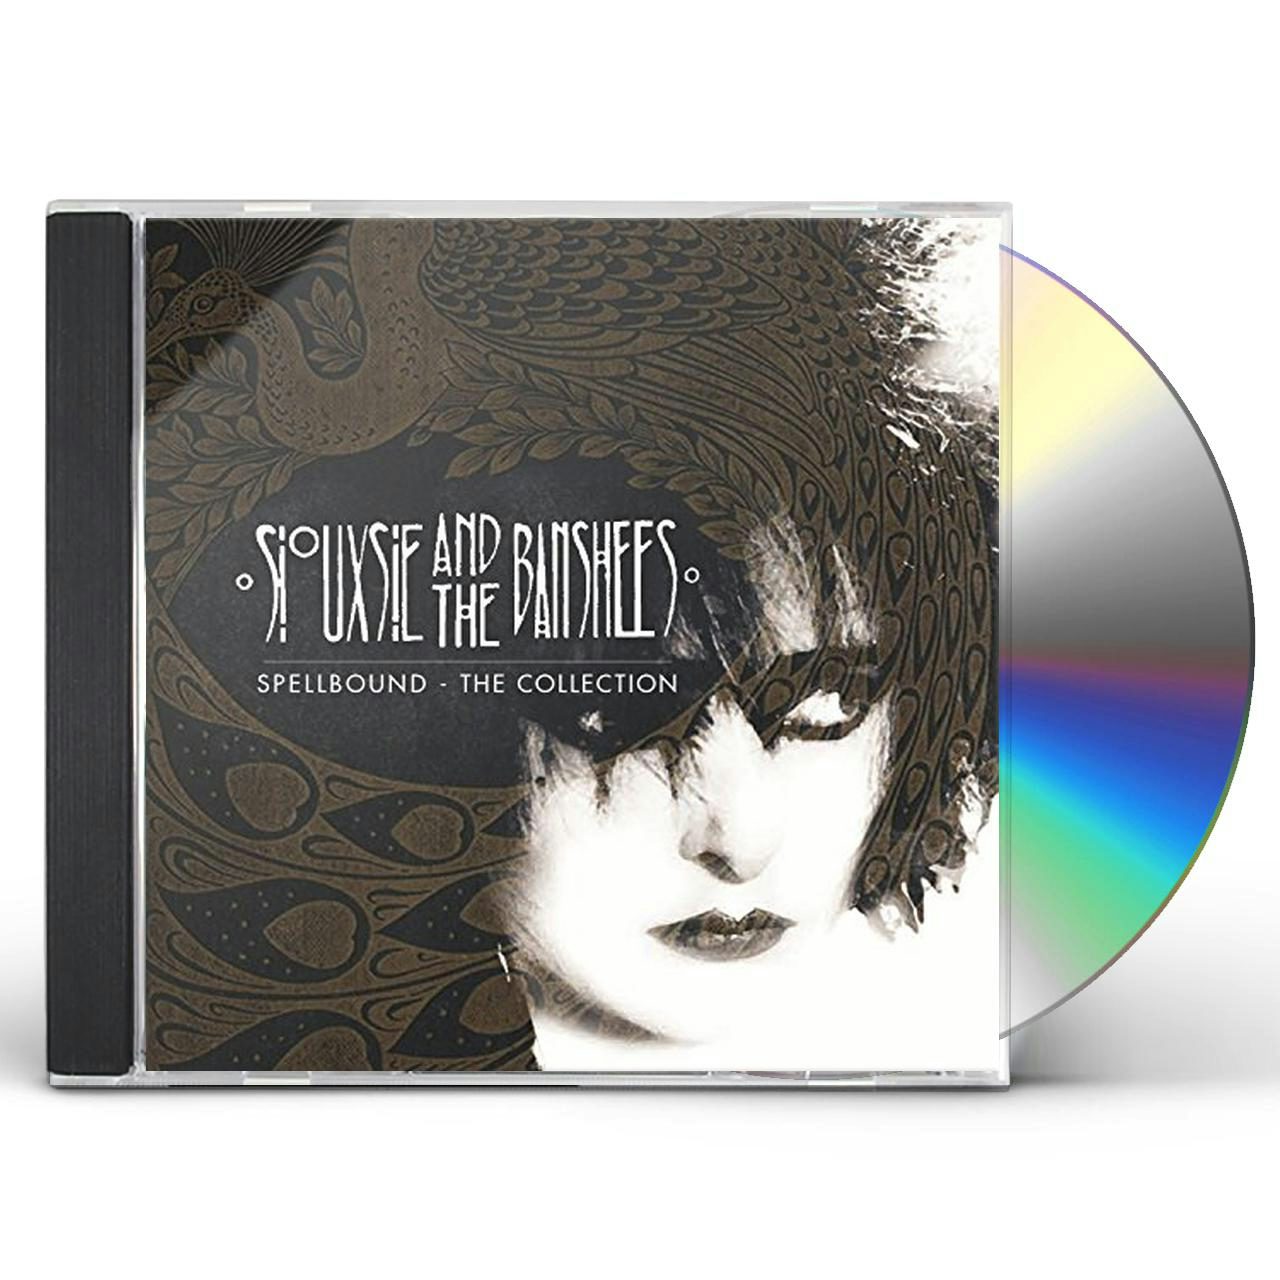 spellbound: the collection cd - Siouxsie and the Banshees